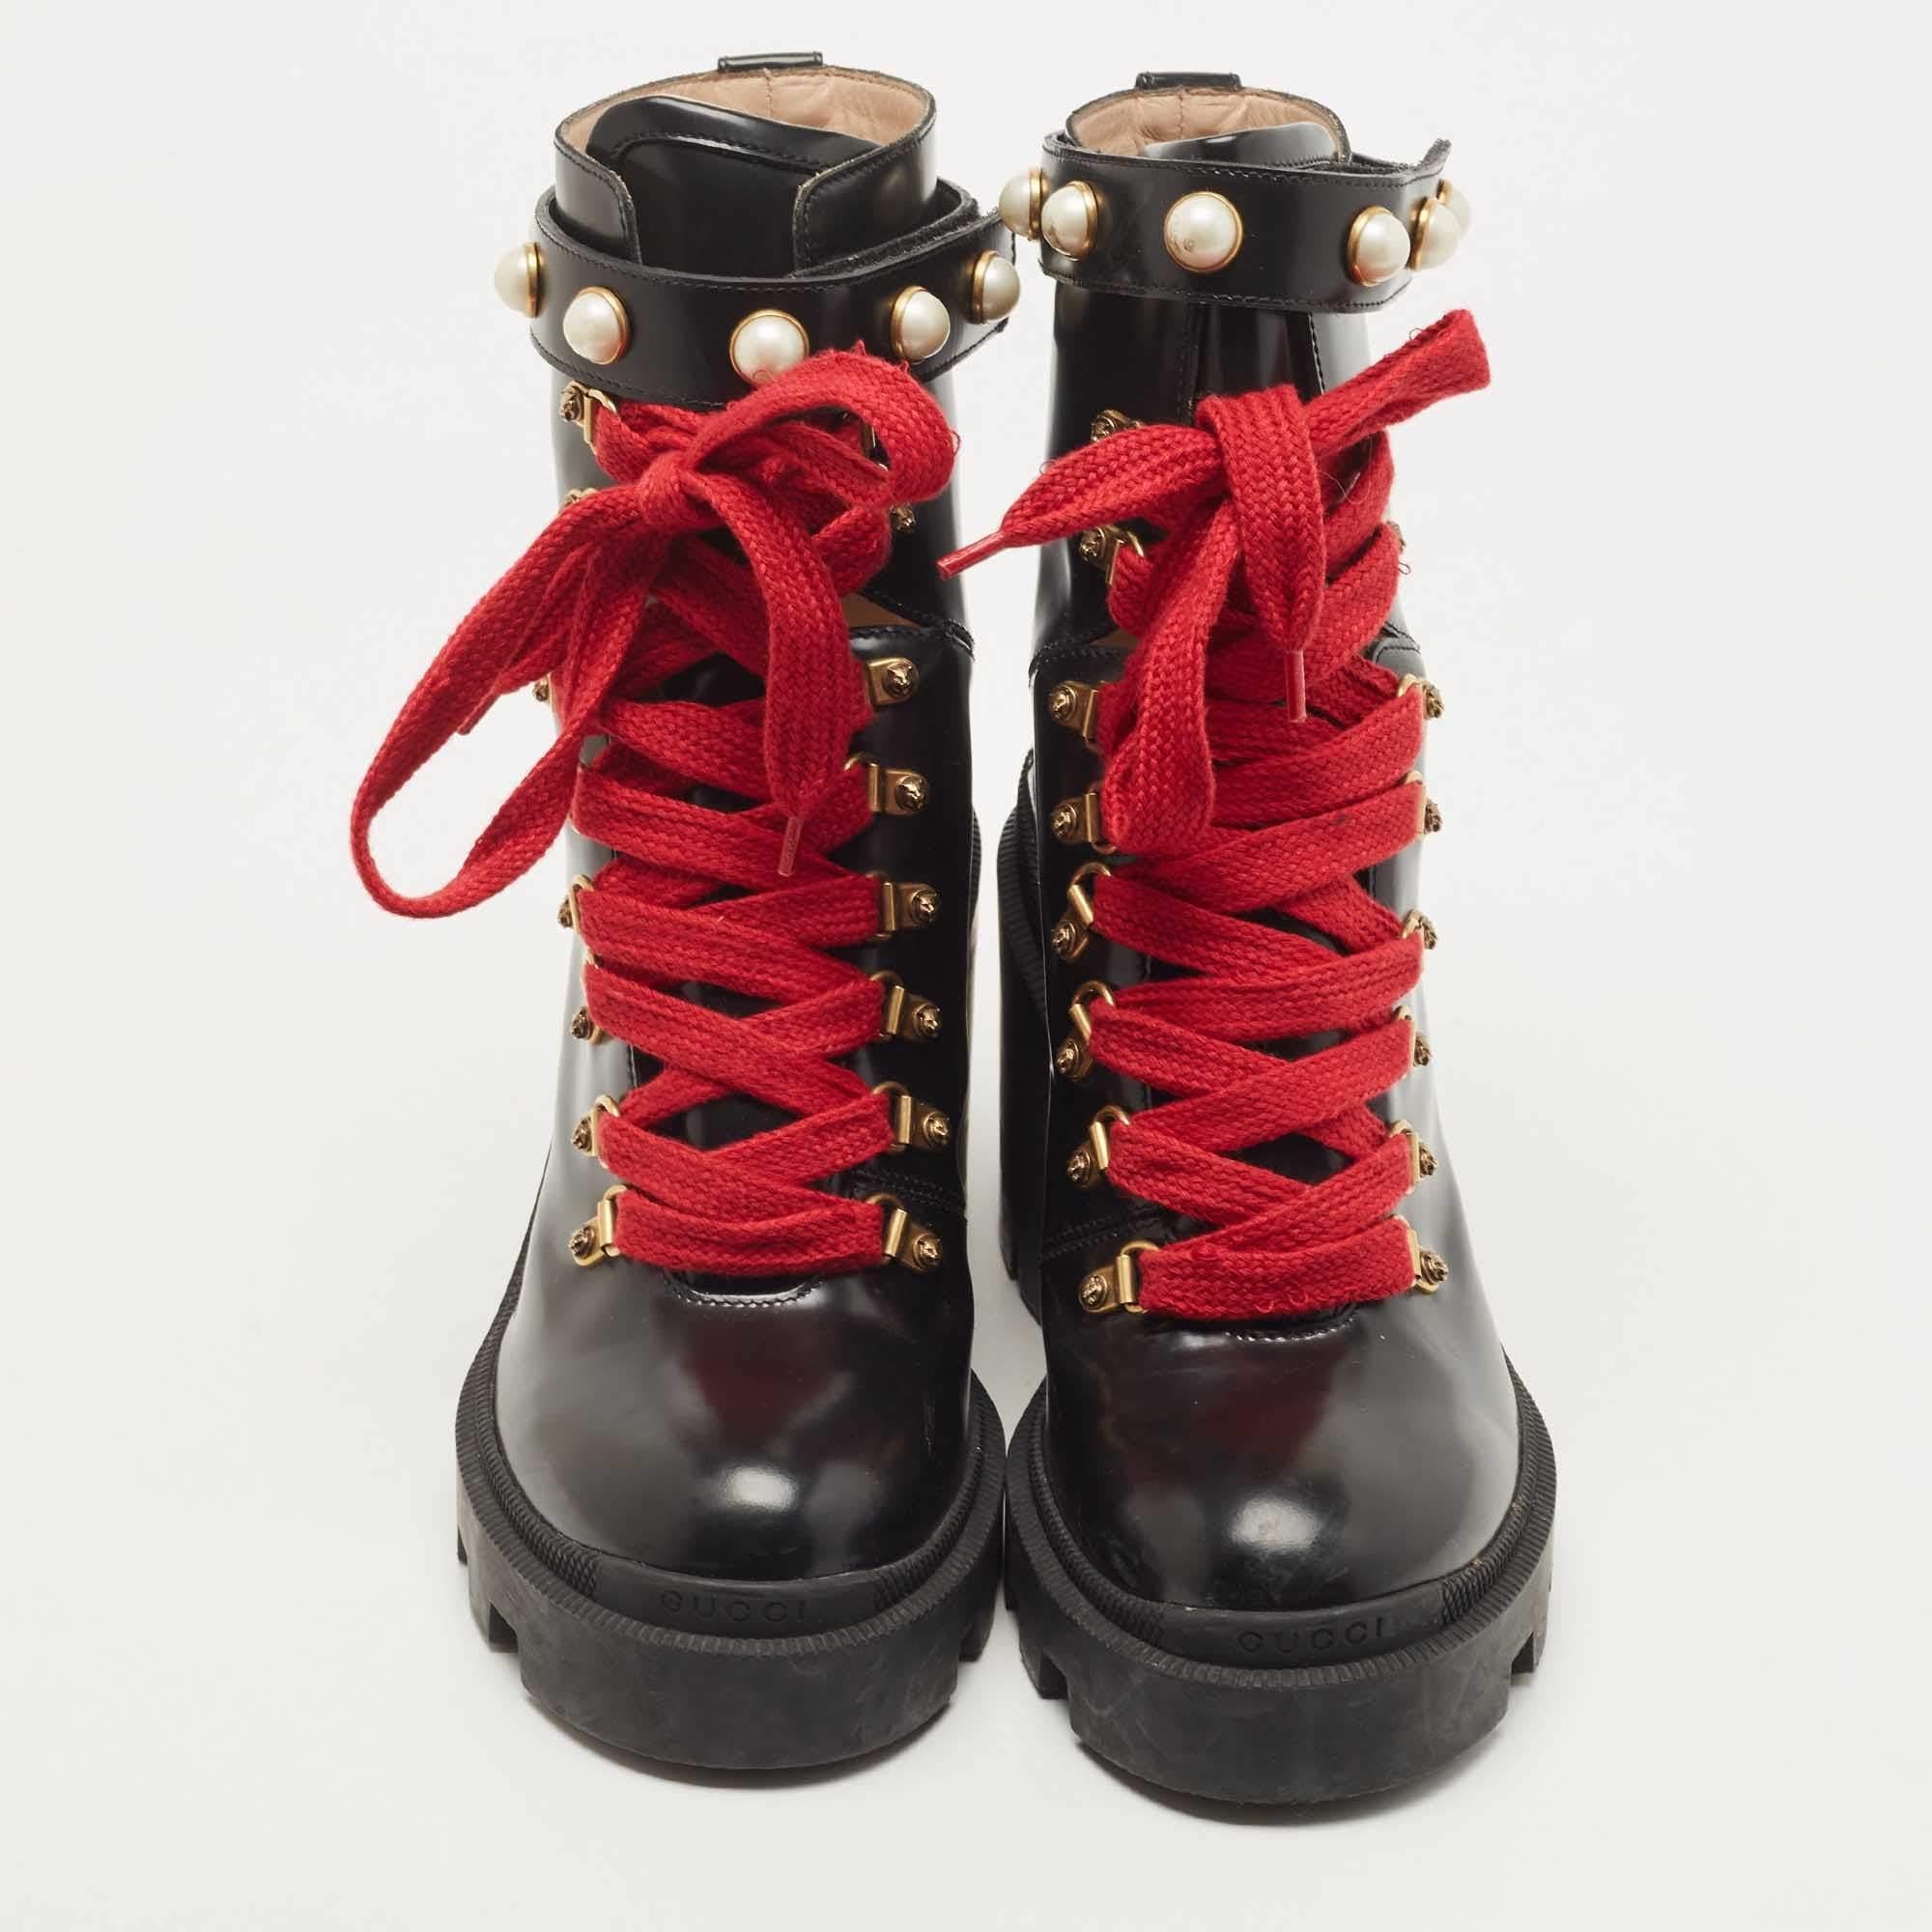 These Gucci ankle-length boots are a perfect amalgamation of comfort, style, and class! The black leather construction takes the form of a rounded-toe silhouette that is enhanced with red laces and gold-tone metal hooks on the vamps, faux